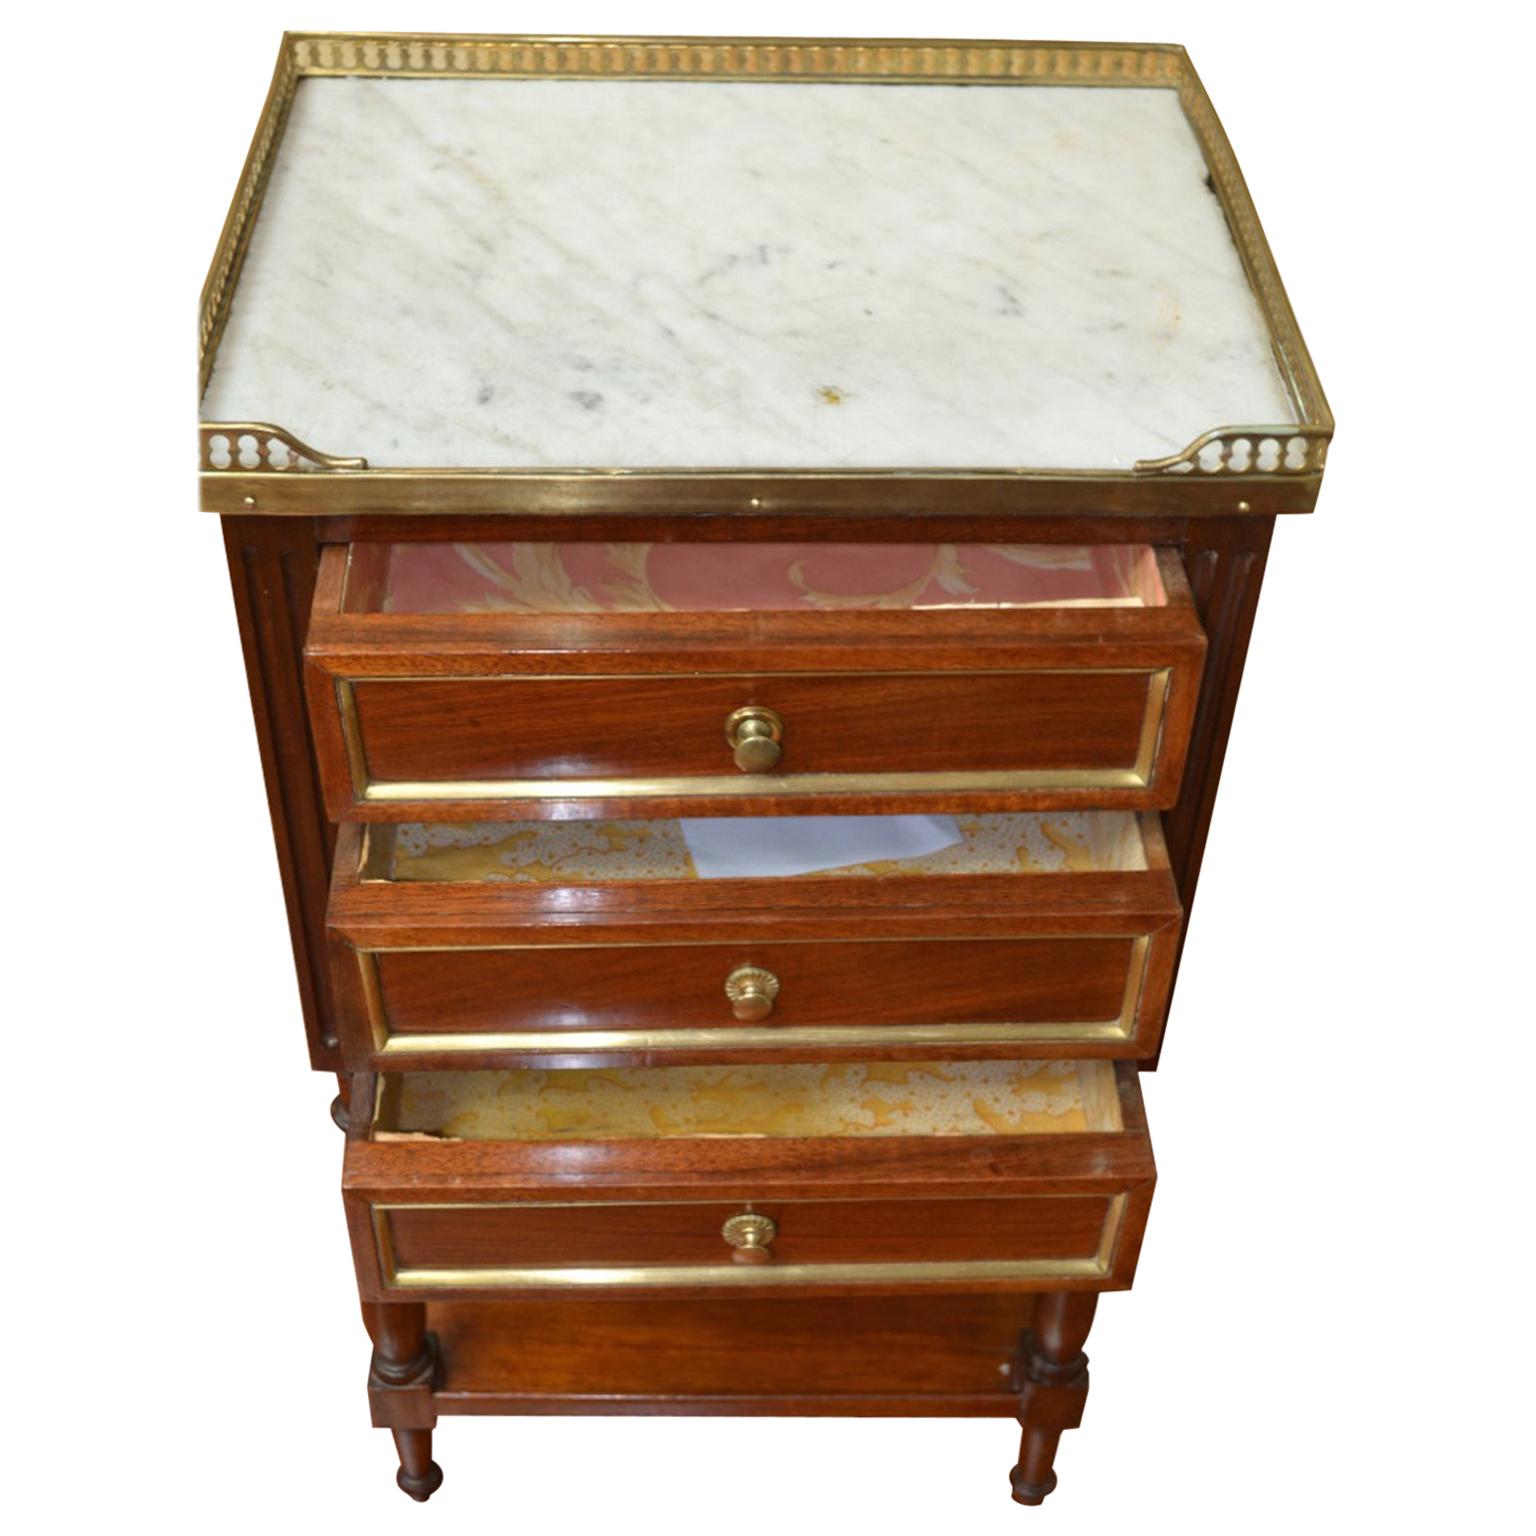 A Louis XVI two-tiered bedside table in well-figured mahogany with a galleried white marble top above three drawers framed with gilded brass filets; a lower shelf between the four turned legs.